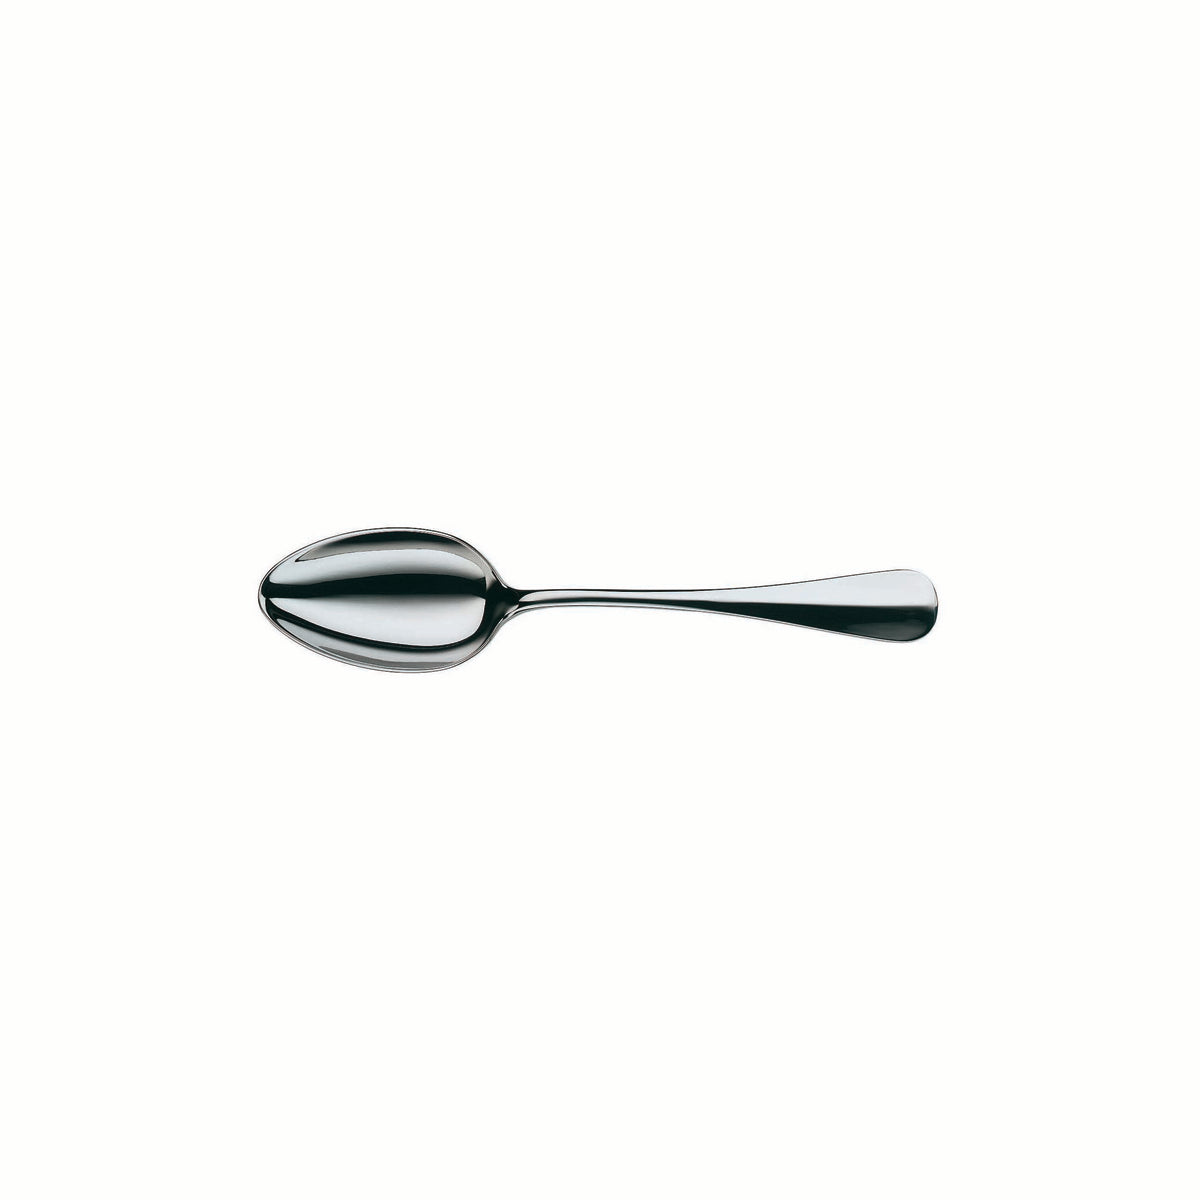 11.0101.6040 WMF Baguette Table Spoon Stainless Steel Tomkin Australia Hospitality Supplies